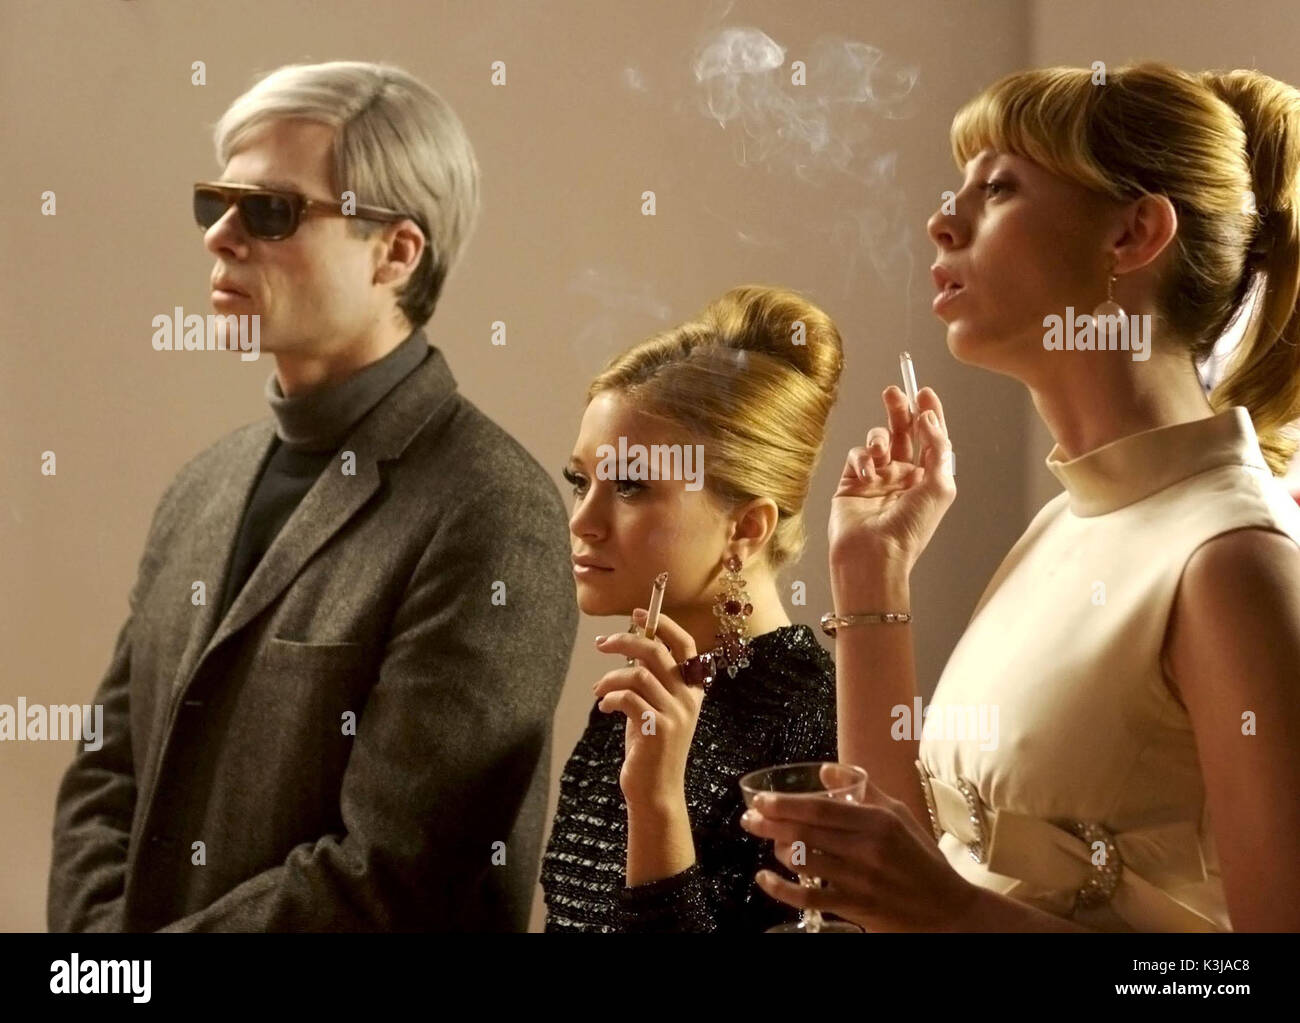 FACTORY GIRL GUY PEARCE comme Andy Warhol , Mary-Kate Olsen (centre), Date : 2006 Banque D'Images